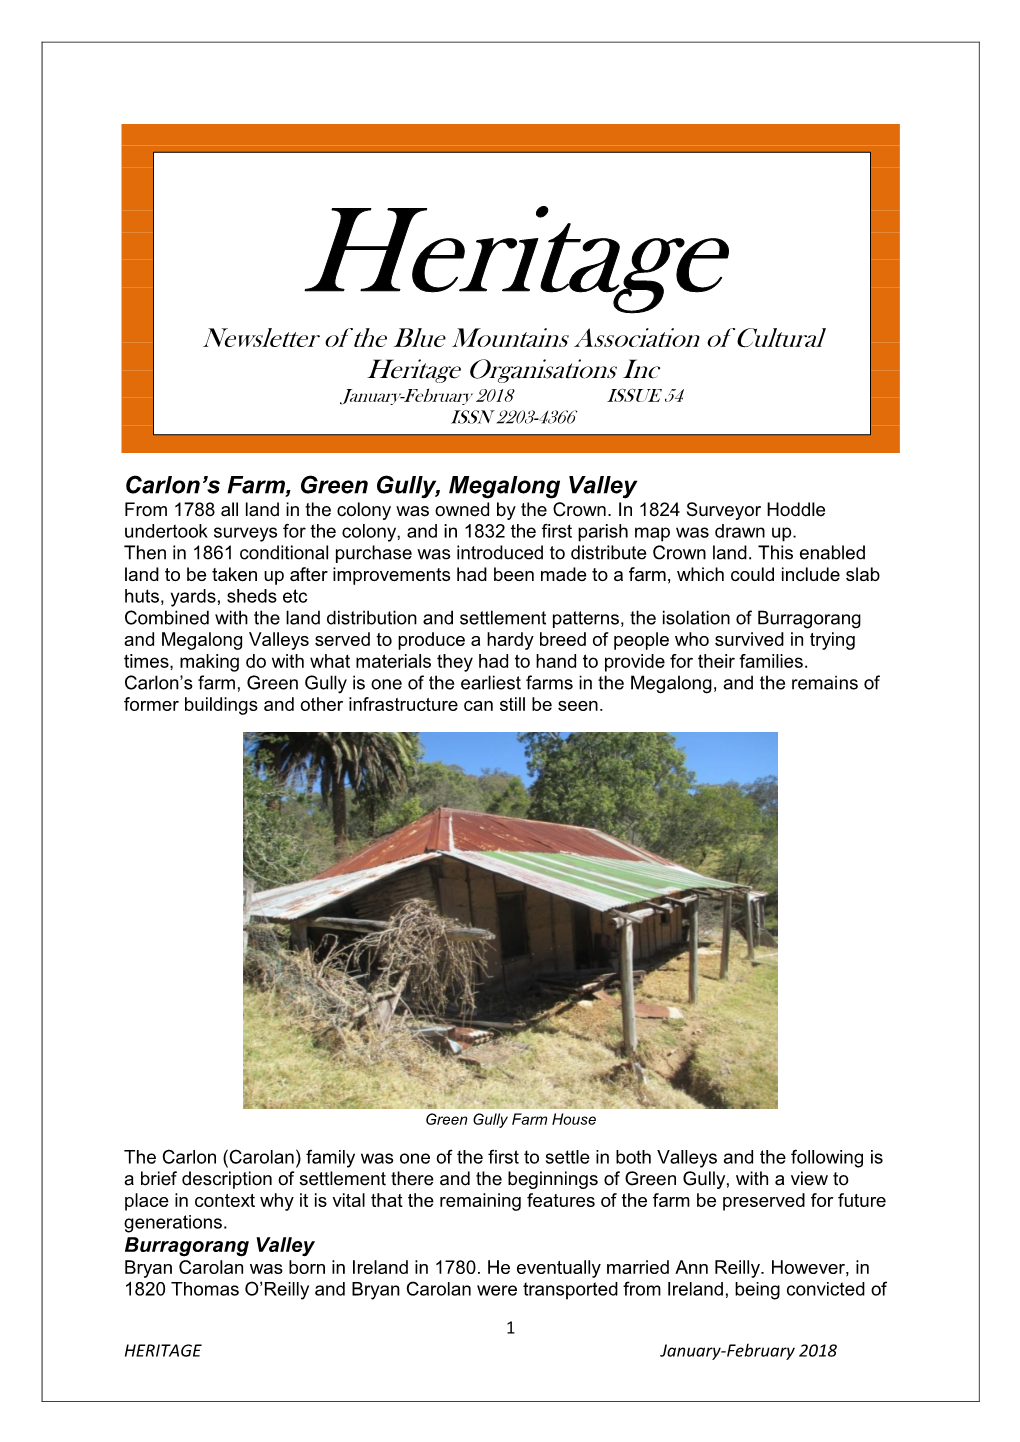 Newsletter of the Blue Mountains Association of Cultural Heritage Organisations Inc January-February 2018 ISSUE 54 ISSN 2203-4366